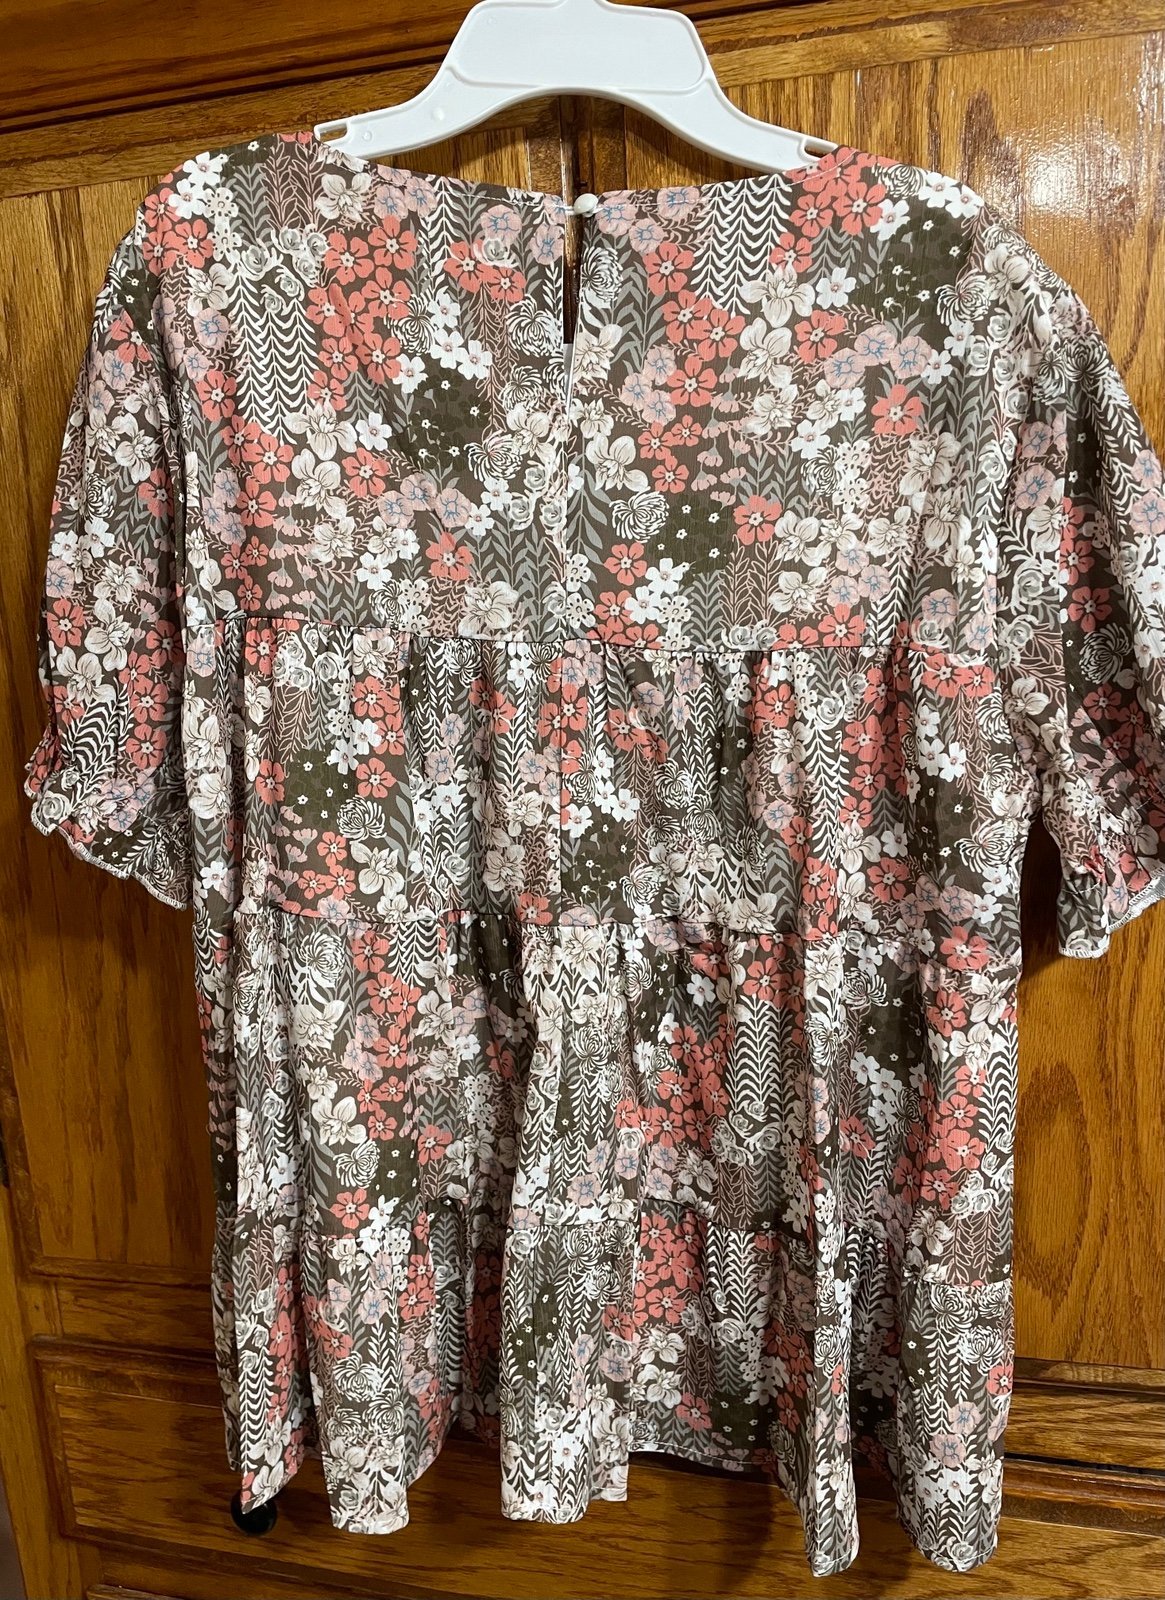 Factory Direct  Women’s Floral Top size large NRvuao4Xu Store Online